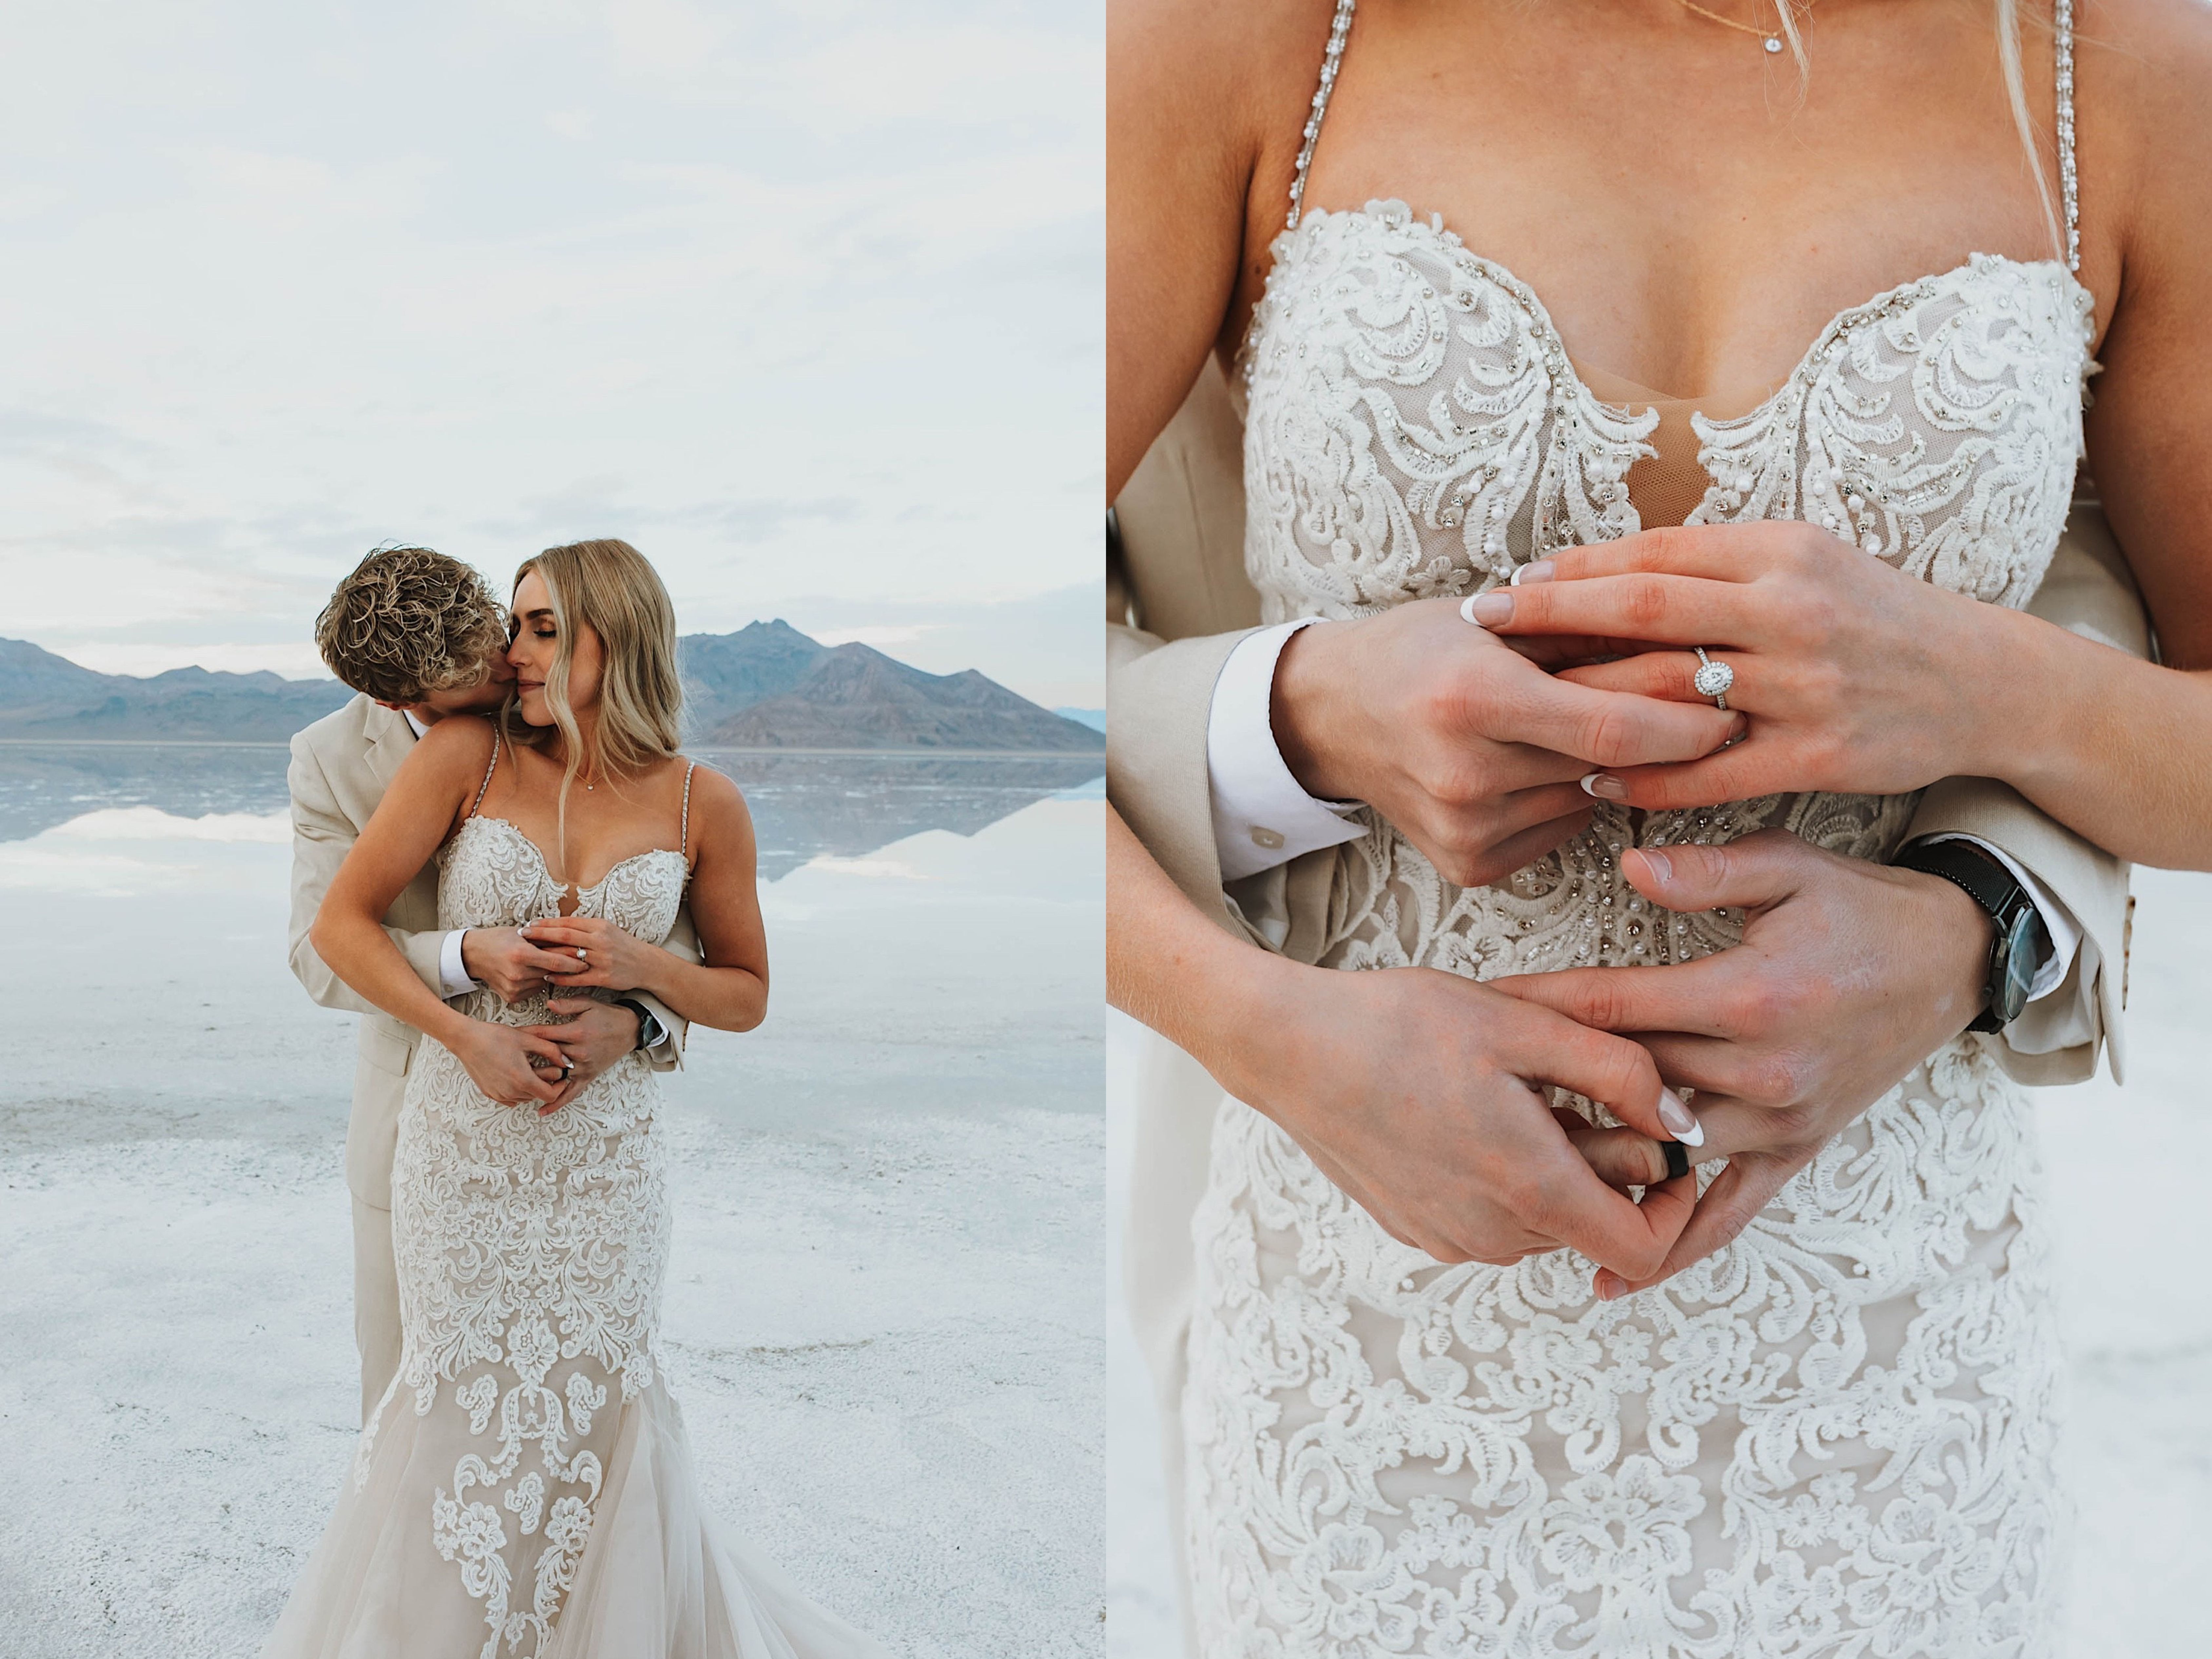 2 photos side by side, the left is of a bride and groom standing in the Utah Salt Flats embrace as the groom kisses the bride on the cheek while standing behind her, the right photo is a close up of the couples hands from the previous photo showing off their wedding rings